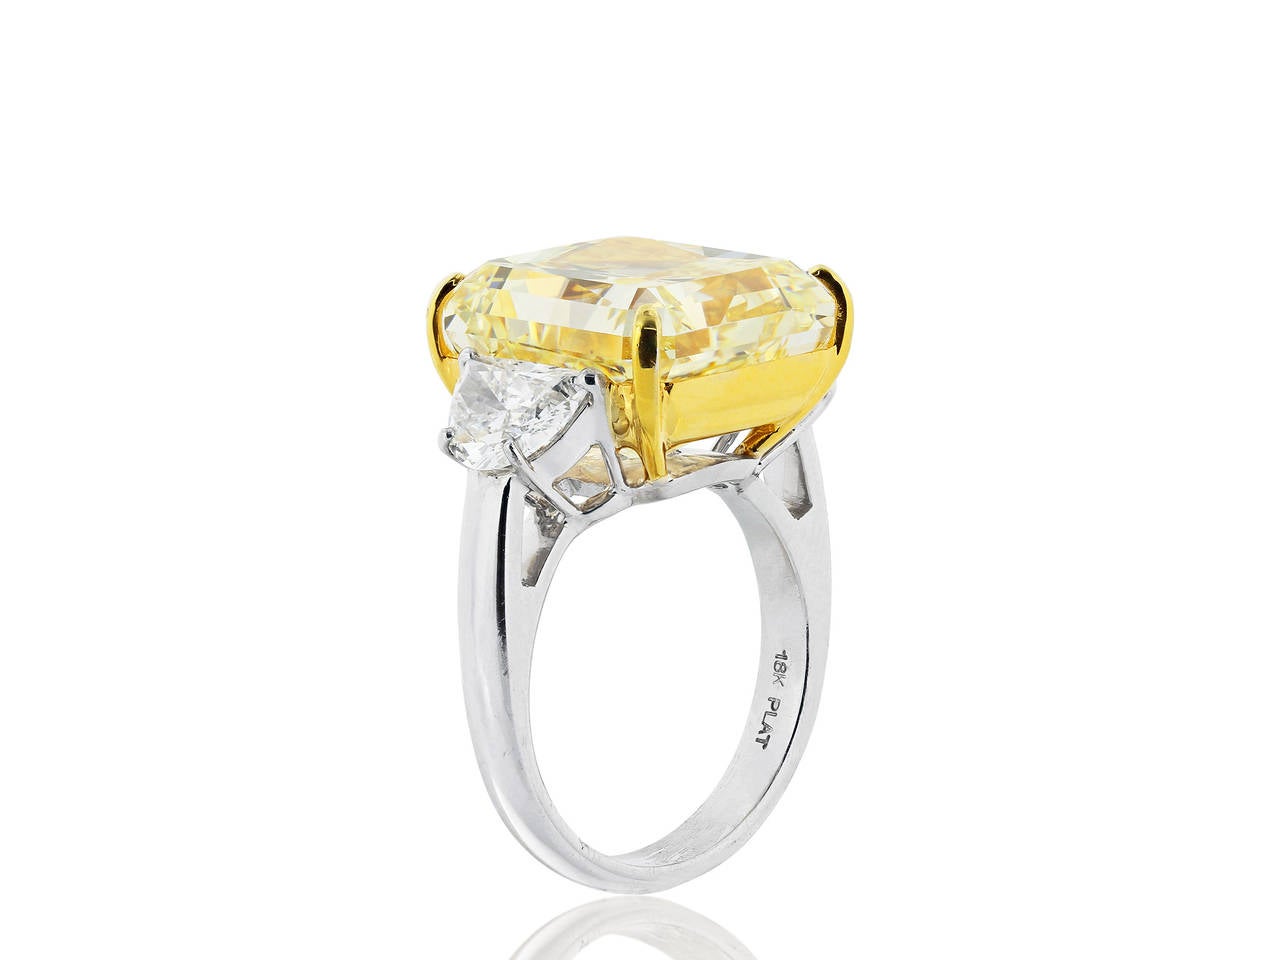 Platinum and 18 karat yellow gold, three stone style engagement ring consisting of 1 radiant cut canary diamond, weighing 14.63 carats, measuring 13.54 x 12.60 x 8.70 mm, having a color and clarity of Fancy Yellow/VS1 with GIA report number